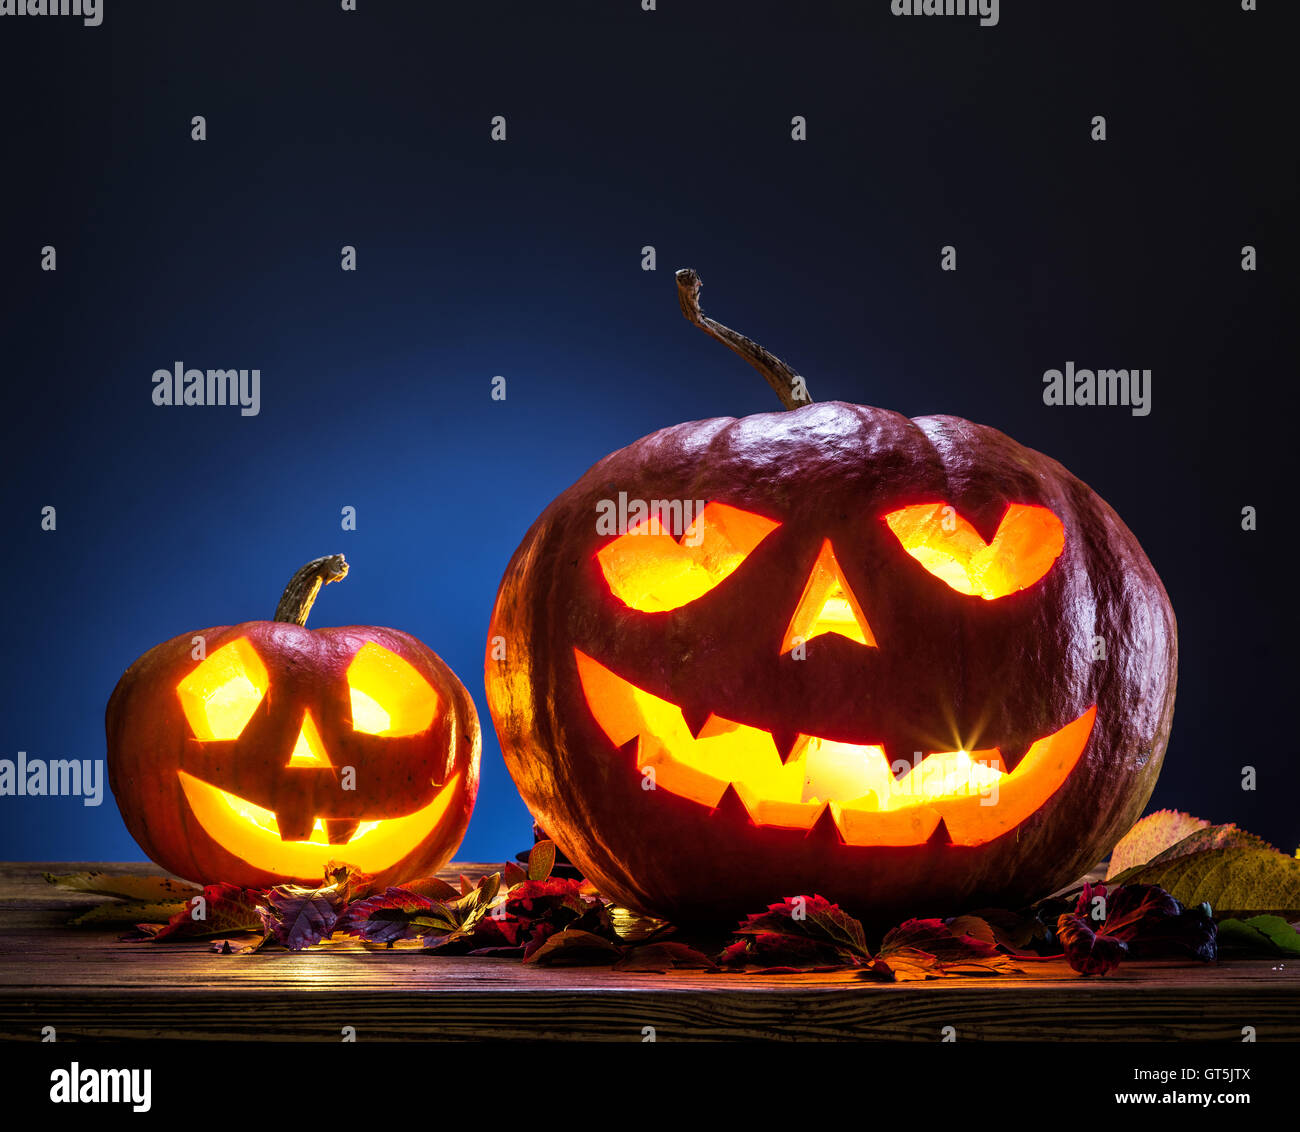 Grinning pumpkin lantern or jack-o'-lantern is one of the symbols of Halloween. Halloween attribute. Wooden background. Stock Photo